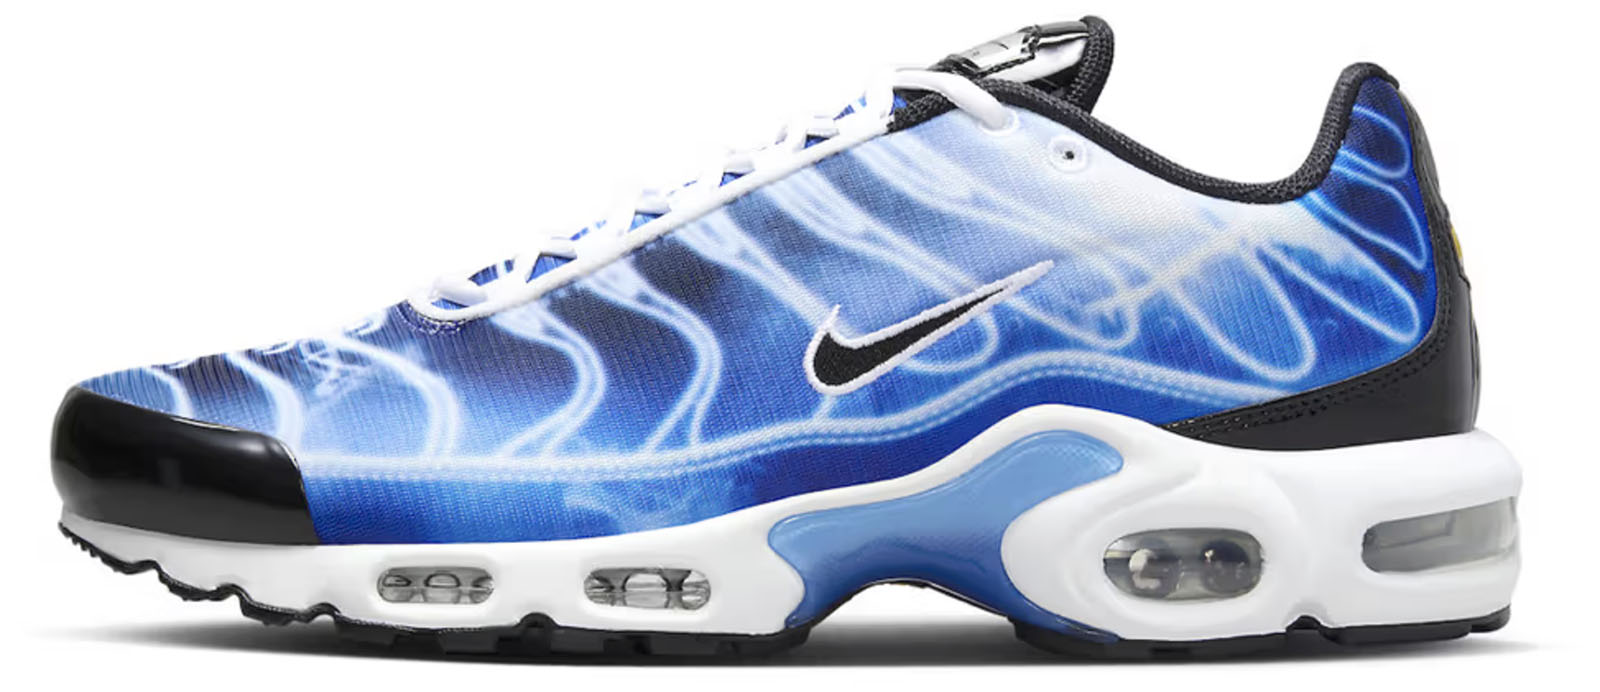 Nike Air Max Plus sneaker in cool blue "light painting photography" variant. 